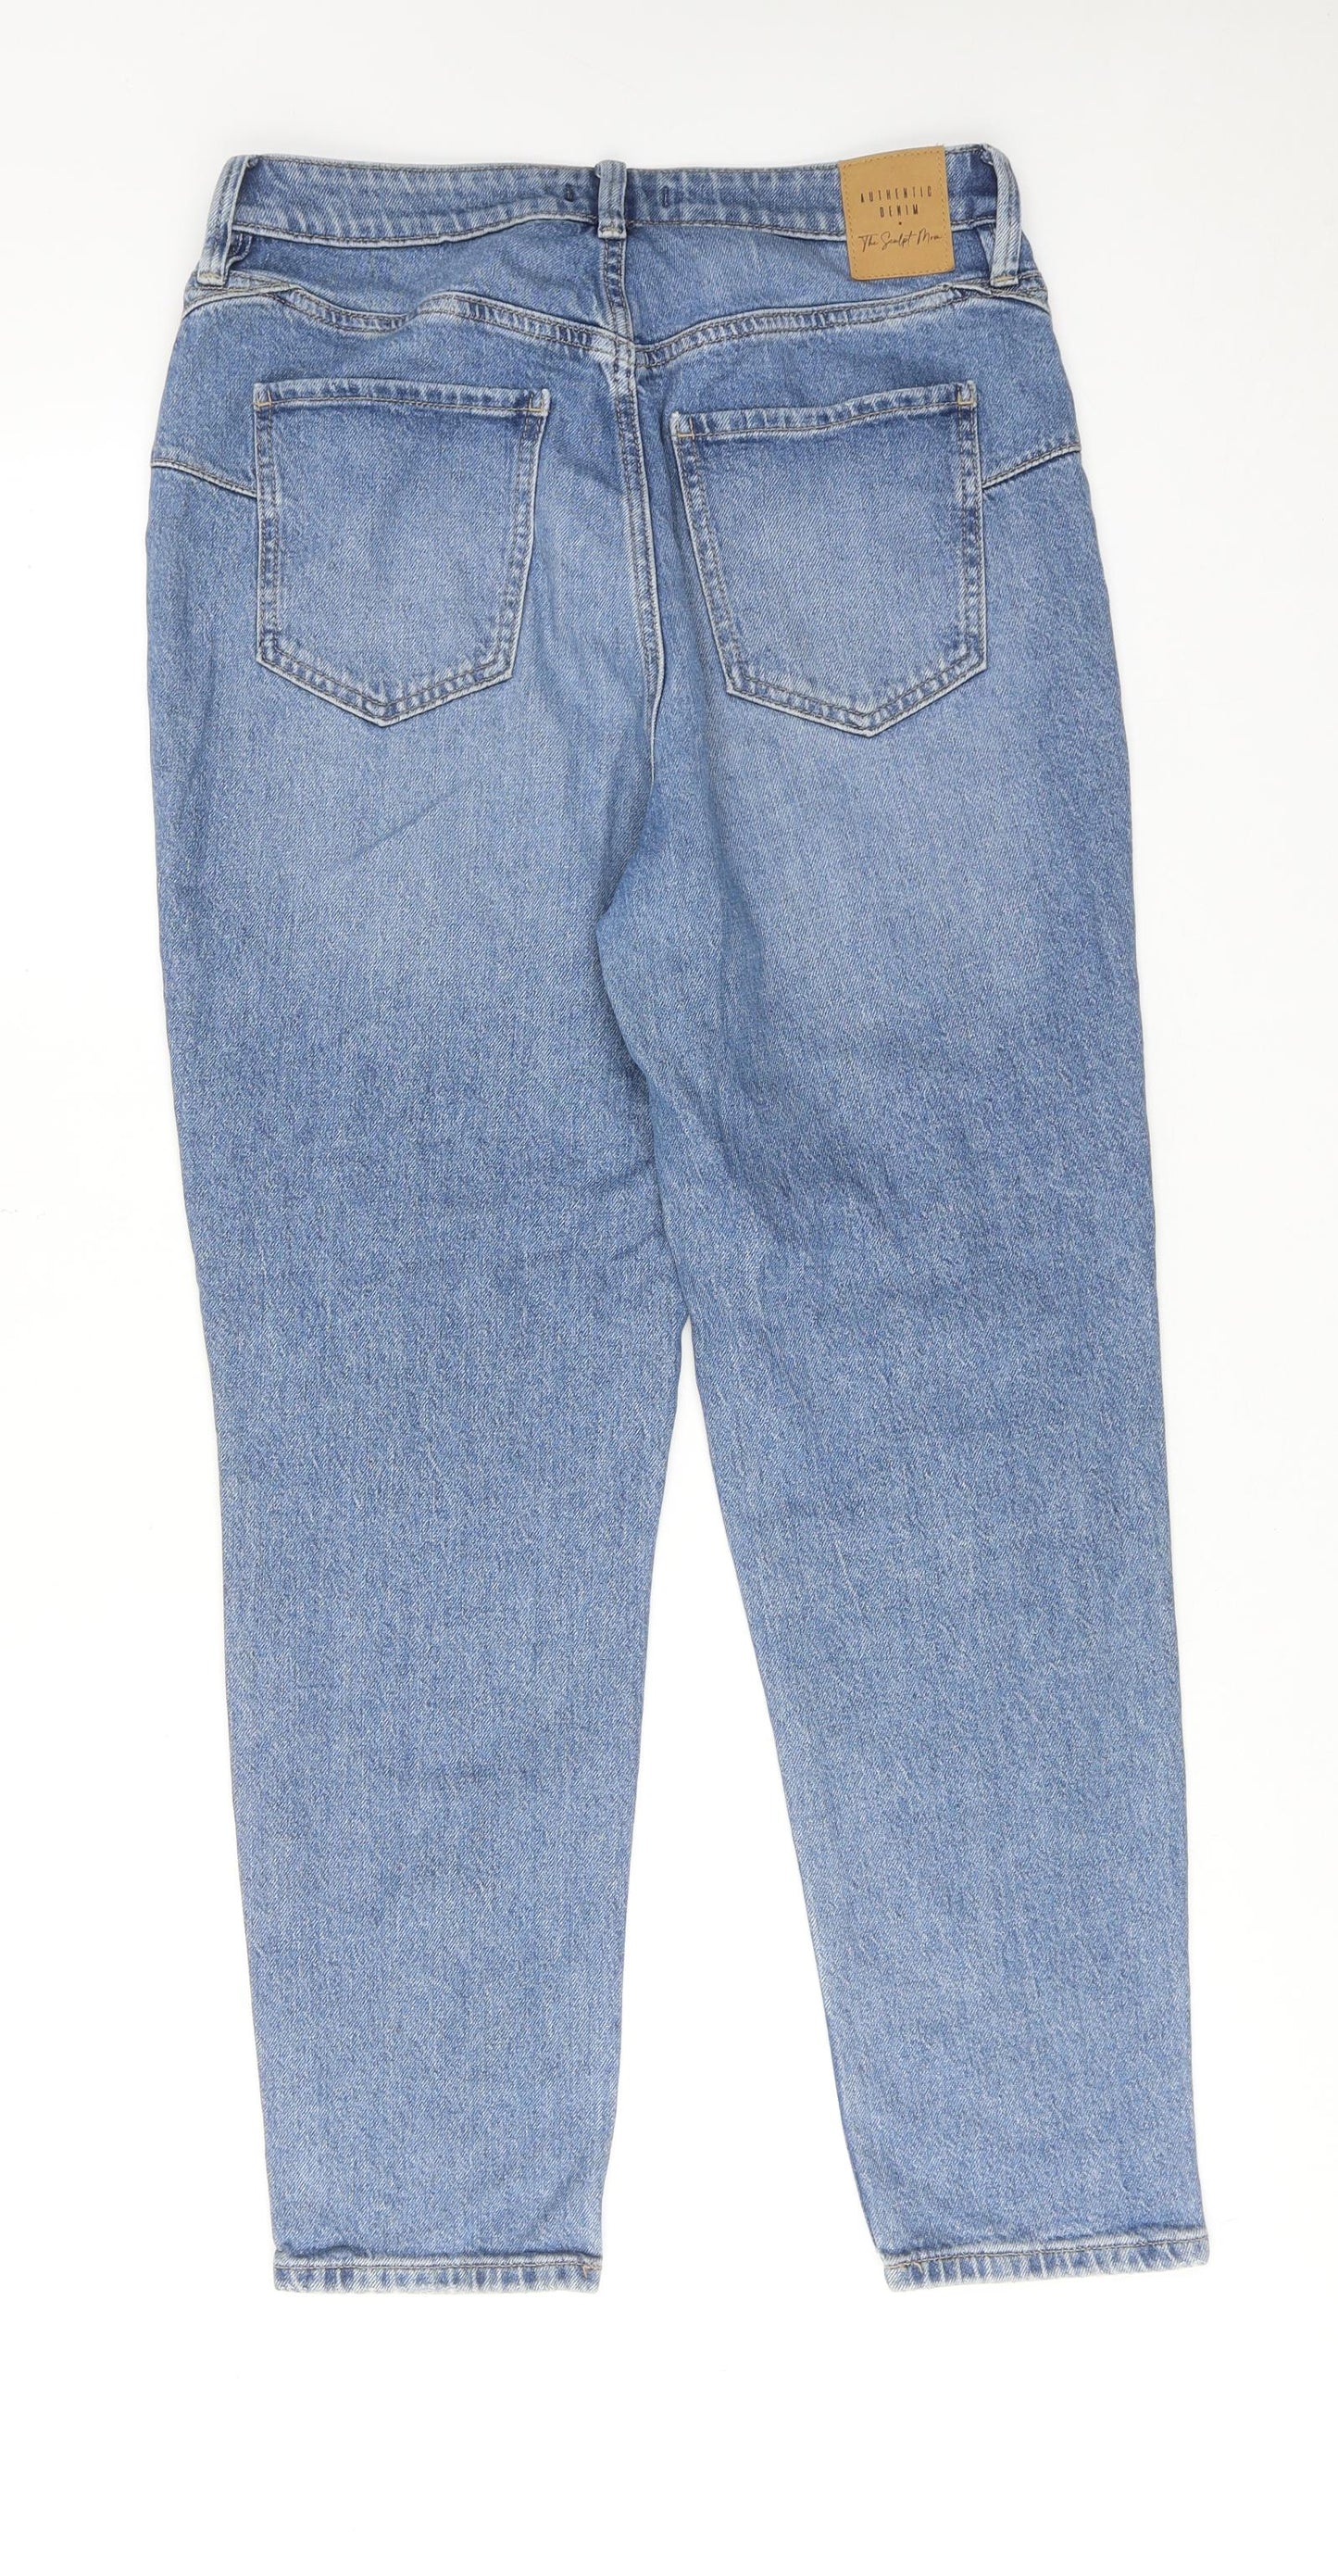 F&F Womens Blue Cotton Tapered Jeans Size 12 Regular Zip